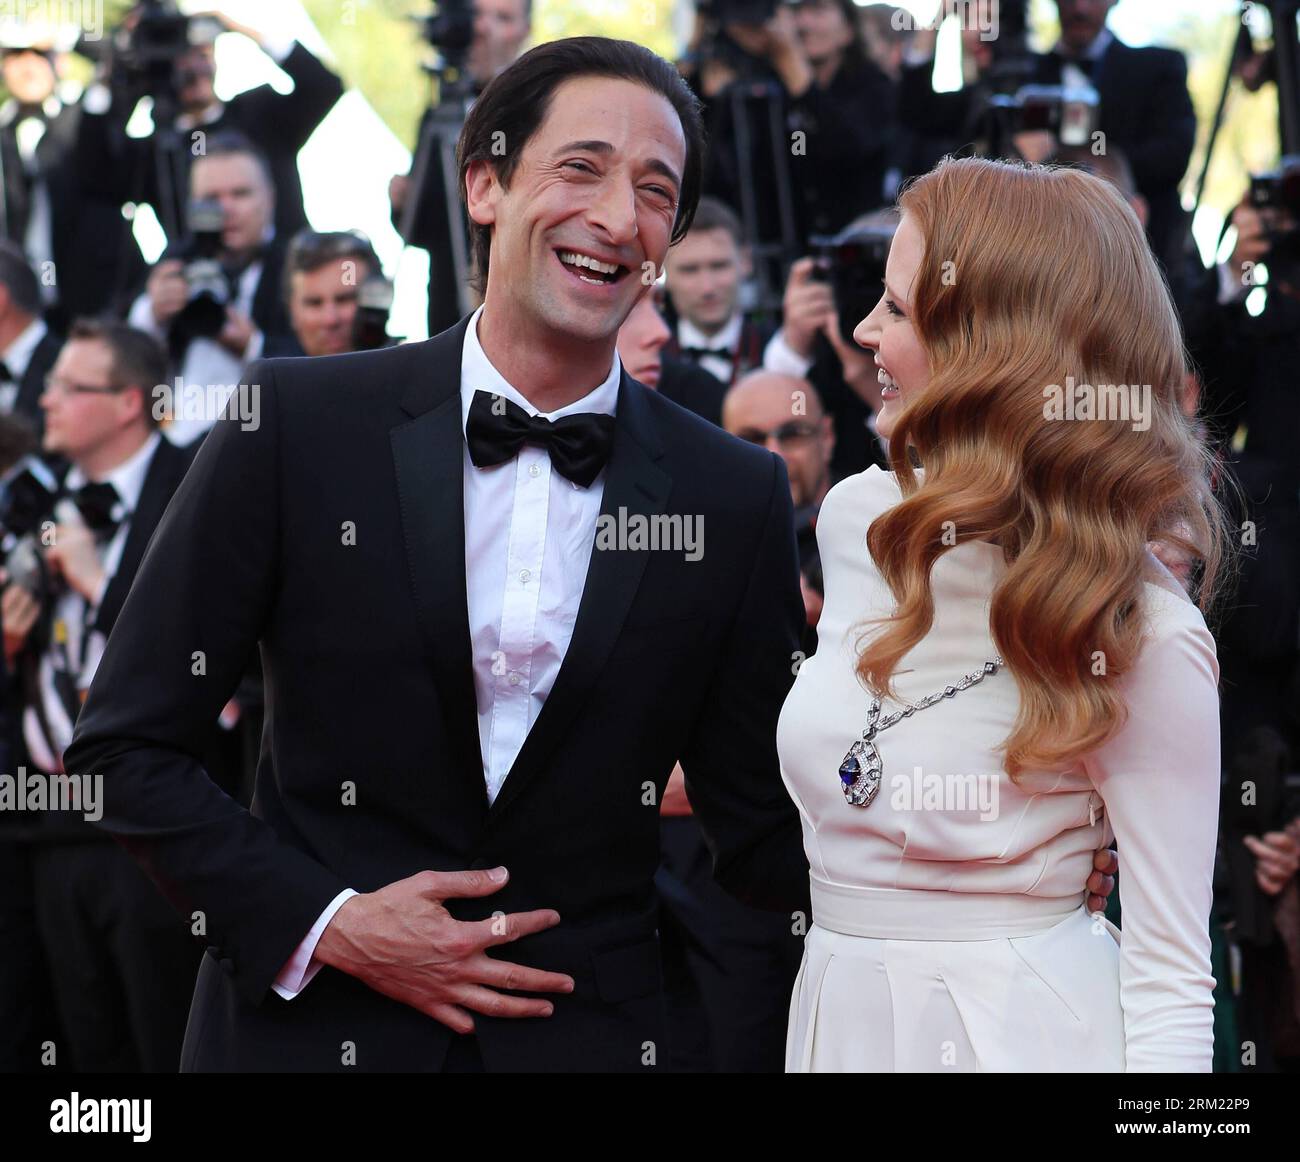 Bildnummer: 59675525  Datum: 21.05.2013  Copyright: imago/Xinhua CANNES, May 21, 2012 -- US actress Jessica Chastain (R) and actor Adrien Brody arrive for the screening of the American film Behind the Candelabra presented in Competition at the 66th edition of the Cannes Film Festival in Cannes, southern France, May 21, 2013. (Xinhua/Gao Jing) (dzl) FRANCE-CANNES-FILM FESTIVAL-BEHIND THE CANDELABRA -PREMIERE PUBLICATIONxNOTxINxCHN Entertainment Film 66 Internationale Filmfestspiele Cannes People premiumd x0x xkg 2013 quadrat     59675525 Date 21 05 2013 Copyright Imago XINHUA Cannes May 21 2012 Stock Photo